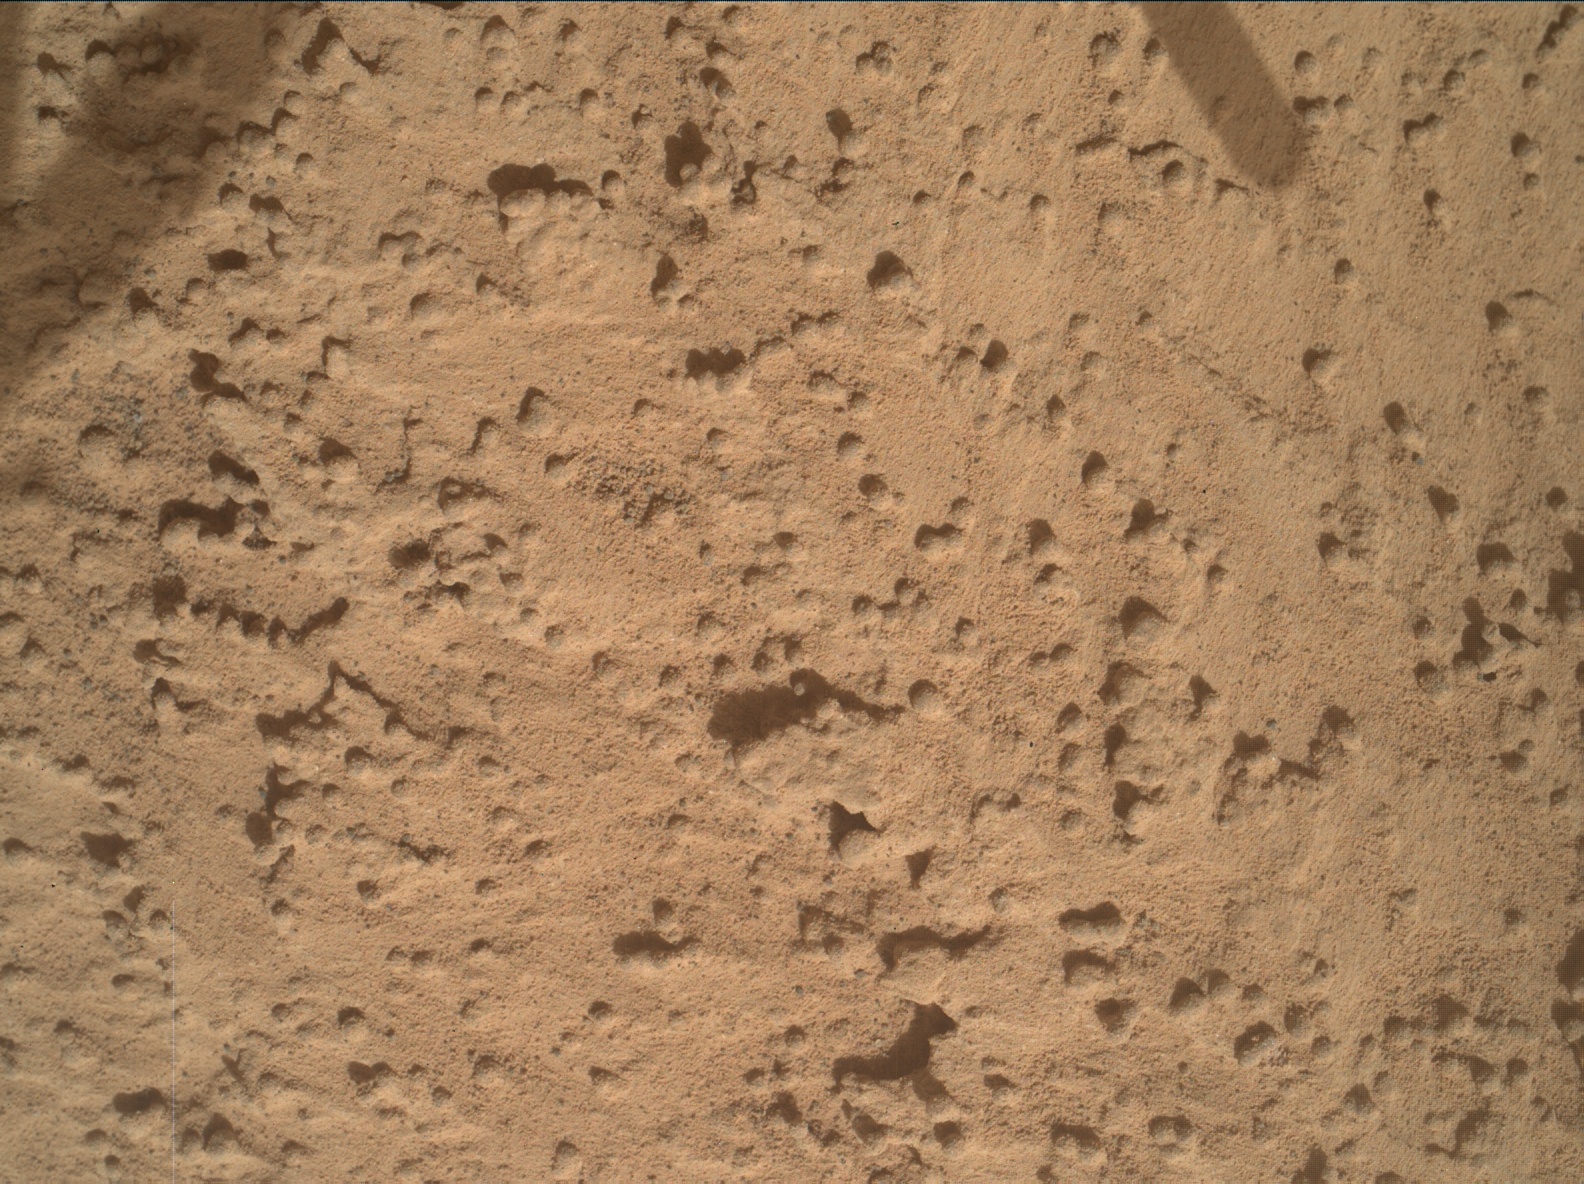 Nasa's Mars rover Curiosity acquired this image using its Mars Hand Lens Imager (MAHLI) on Sol 3383